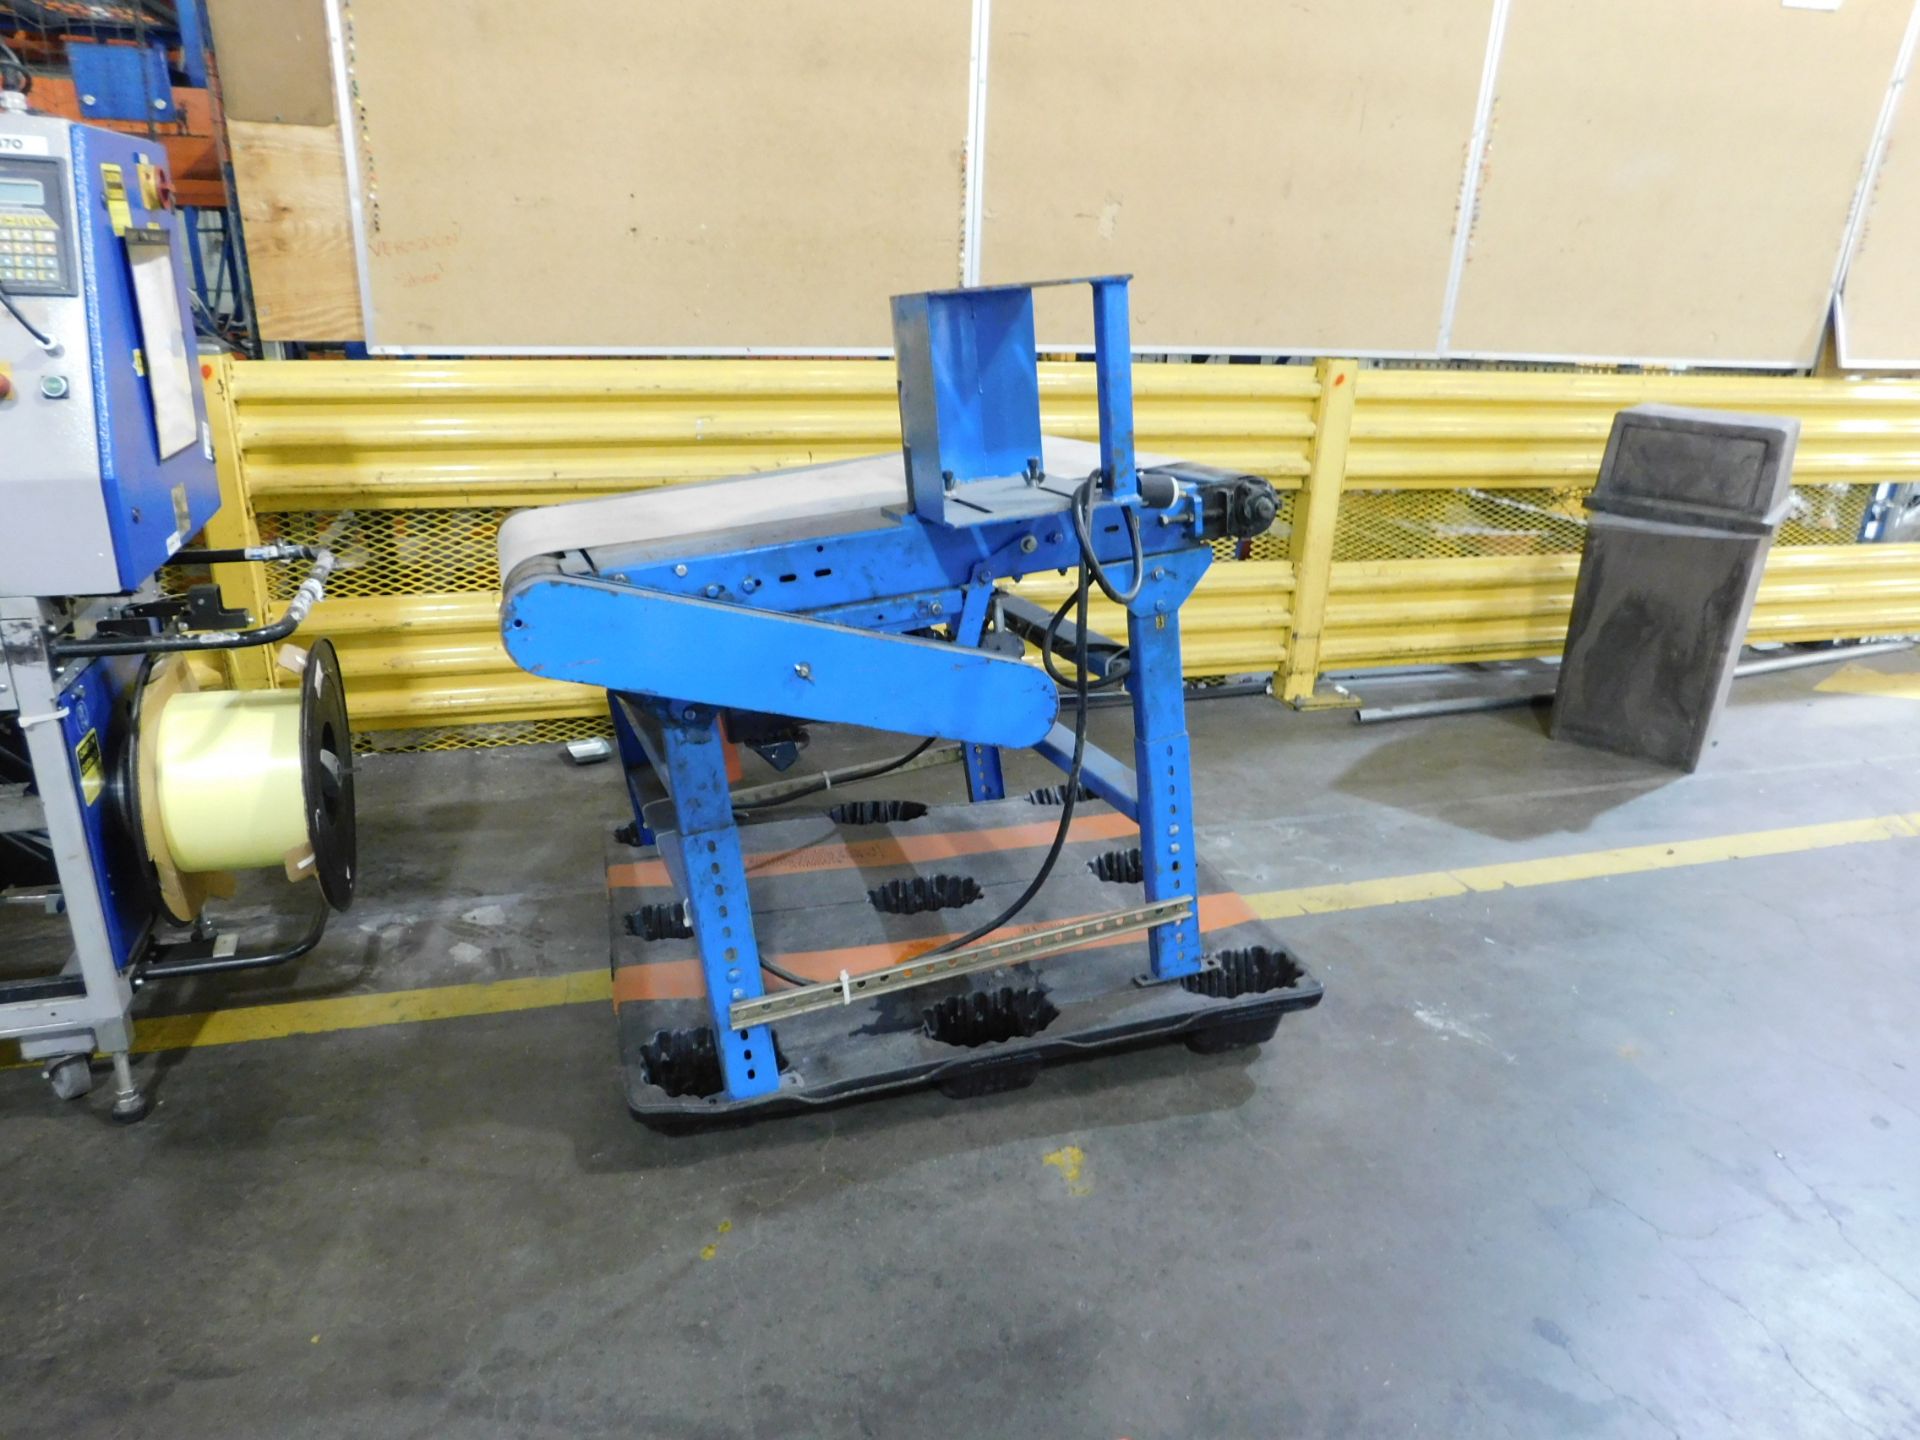 2000 Dynark banding machine with discharge roller conveyor, 5 ft. long by 18 in. wide, asset # T470, - Image 2 of 2